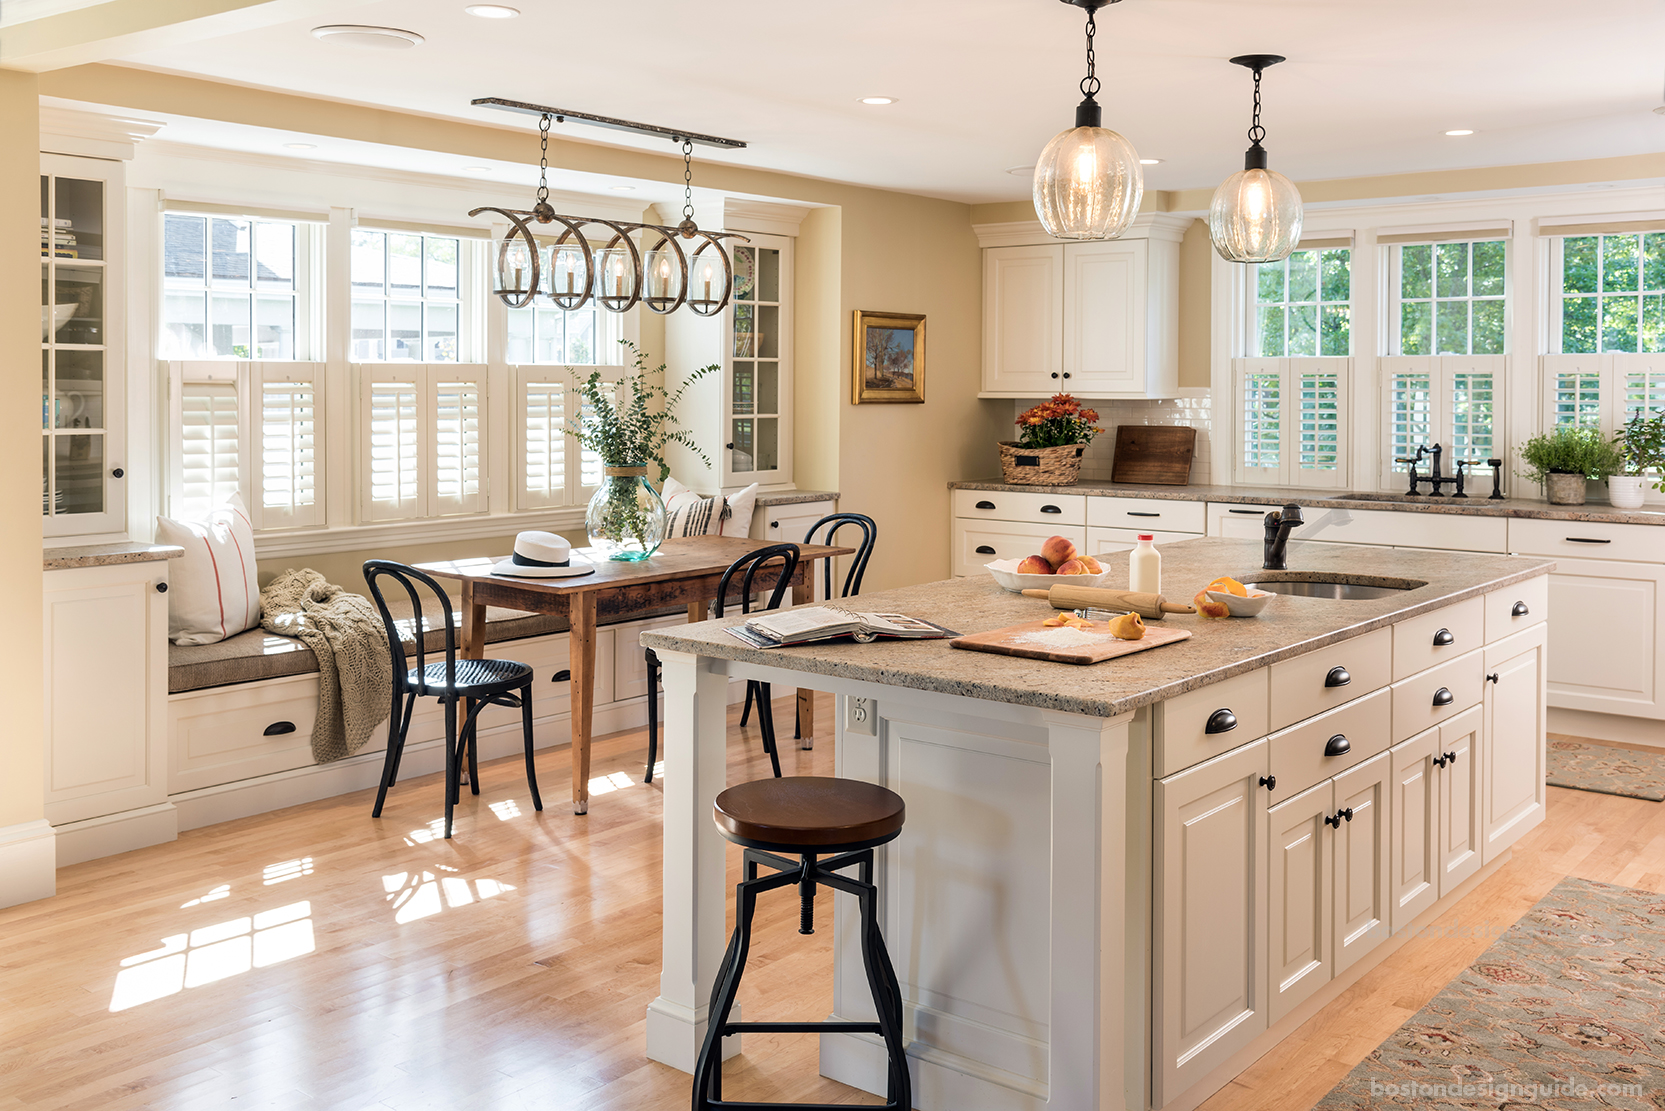 A Historic Hingham Home Gets a Kitchen Makeover | Boston Design Guide